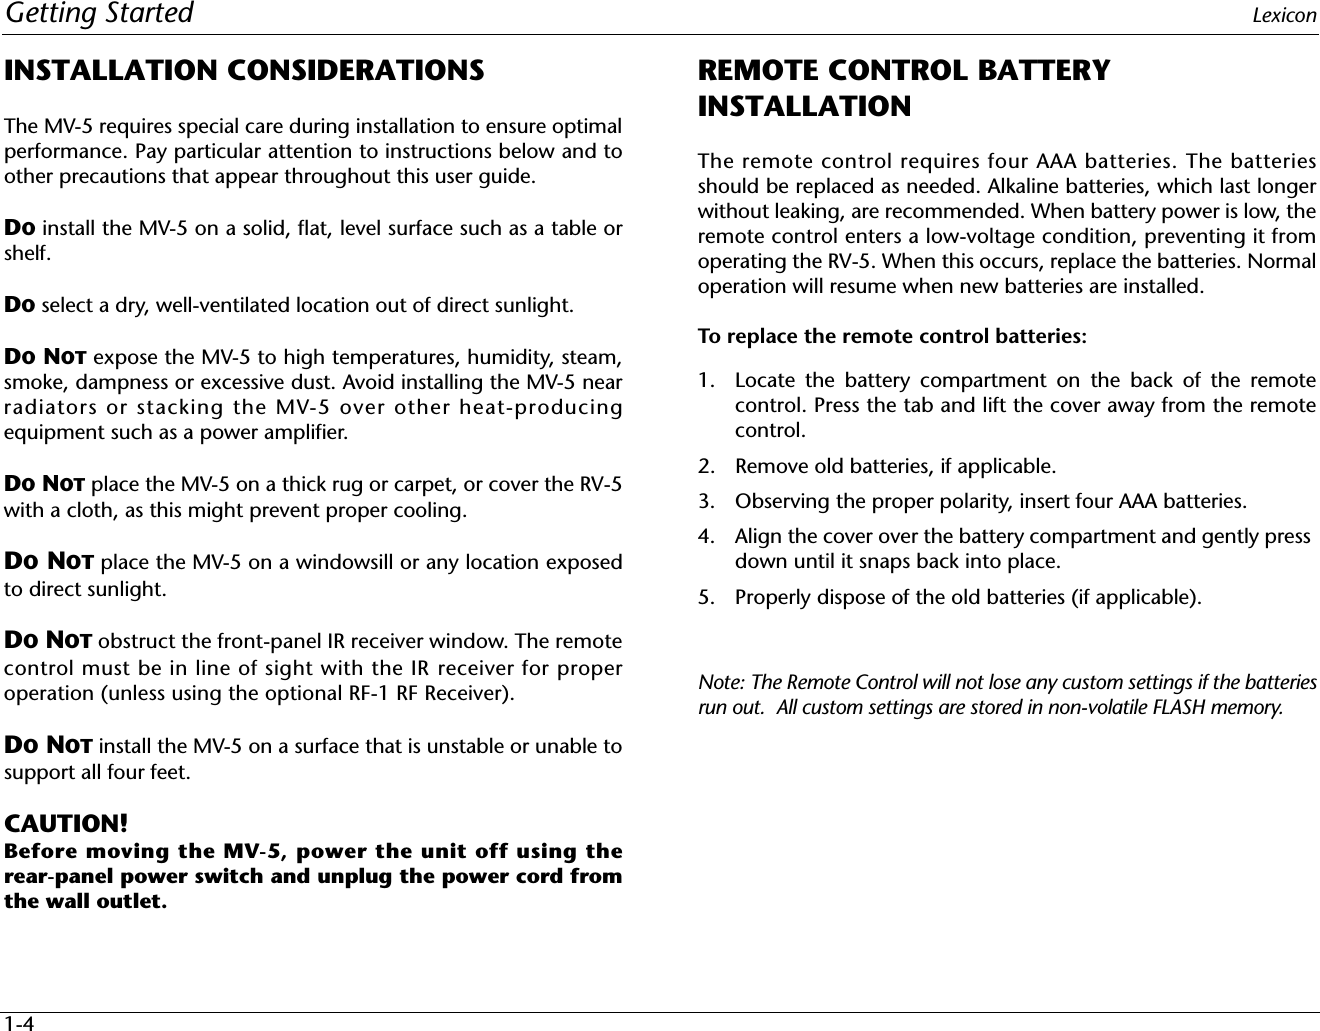 Getting Started Lexicon1-4INSTALLATION CONSIDERATIONSThe MV-5 requires special care during installation to ensure optimalperformance. Pay particular attention to instructions below and toother precautions that appear throughout this user guide.DO install the MV-5 on a solid, flat, level surface such as a table orshelf. DO select a dry, well-ventilated location out of direct sunlight.DO NOT expose the MV-5 to high temperatures, humidity, steam,smoke, dampness or excessive dust. Avoid installing the MV-5 nearradiators or stacking the MV-5 over other heat-producingequipment such as a power amplifier.DO NOT place the MV-5 on a thick rug or carpet, or cover the RV-5with a cloth, as this might prevent proper cooling.DO NOT place the MV-5 on a windowsill or any location exposedto direct sunlight.DO NOT obstruct the front-panel IR receiver window. The remotecontrol must be in line of sight with the IR receiver for properoperation (unless using the optional RF-1 RF Receiver).DO NOT install the MV-5 on a surface that is unstable or unable tosupport all four feet.CAUTION! Before moving the MV-5, power the unit off using therear-panel power switch and unplug the power cord fromthe wall outlet.REMOTE CONTROL BATTERY INSTALLATIONThe remote control requires four AAA batteries. The batteriesshould be replaced as needed. Alkaline batteries, which last longerwithout leaking, are recommended. When battery power is low, theremote control enters a low-voltage condition, preventing it fromoperating the RV-5. When this occurs, replace the batteries. Normaloperation will resume when new batteries are installed.To replace the remote control batteries:1. Locate the battery compartment on the back of the remotecontrol. Press the tab and lift the cover away from the remotecontrol. 2. Remove old batteries, if applicable.3. Observing the proper polarity, insert four AAA batteries.4. Align the cover over the battery compartment and gently press down until it snaps back into place.5. Properly dispose of the old batteries (if applicable).Note: The Remote Control will not lose any custom settings if the batteriesrun out.  All custom settings are stored in non-volatile FLASH memory. 